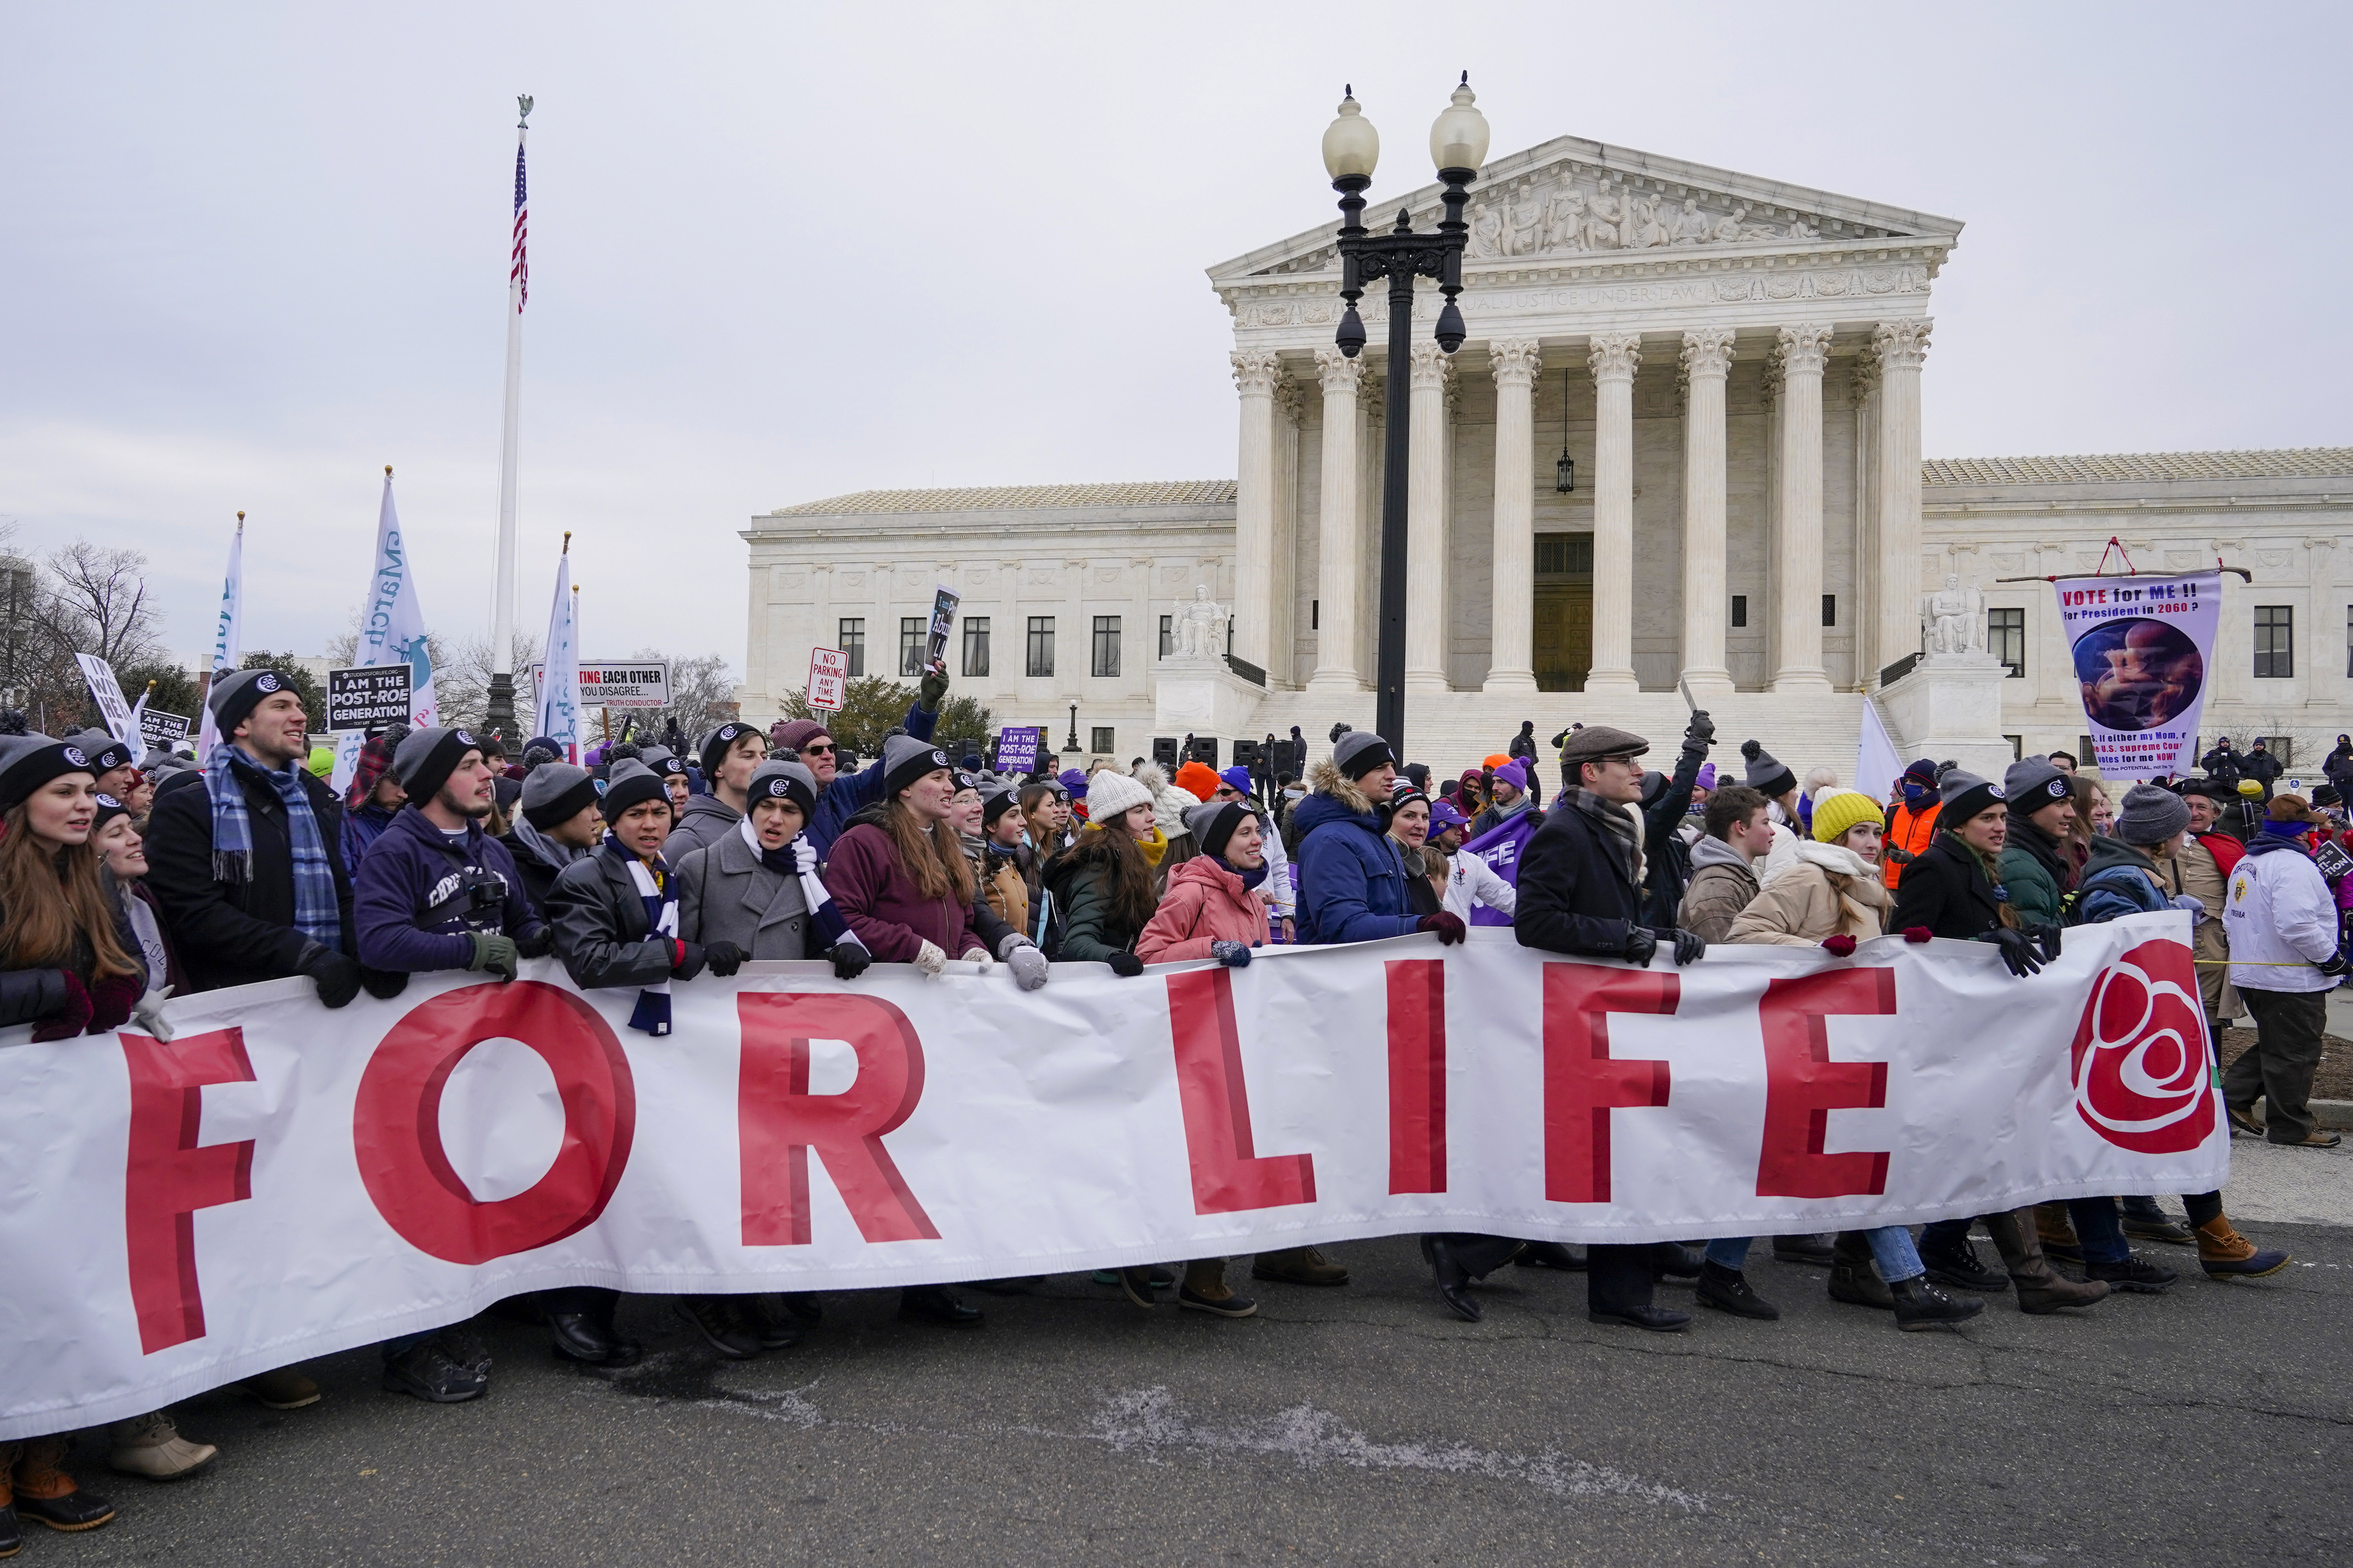 FILE - The March for Life gathers outside the Supreme Court, Washington, Jan. 21, 2022. The annual march will take place on Friday, Jan. 20, 2023. (AP Photo/Patrick Semansky, File)